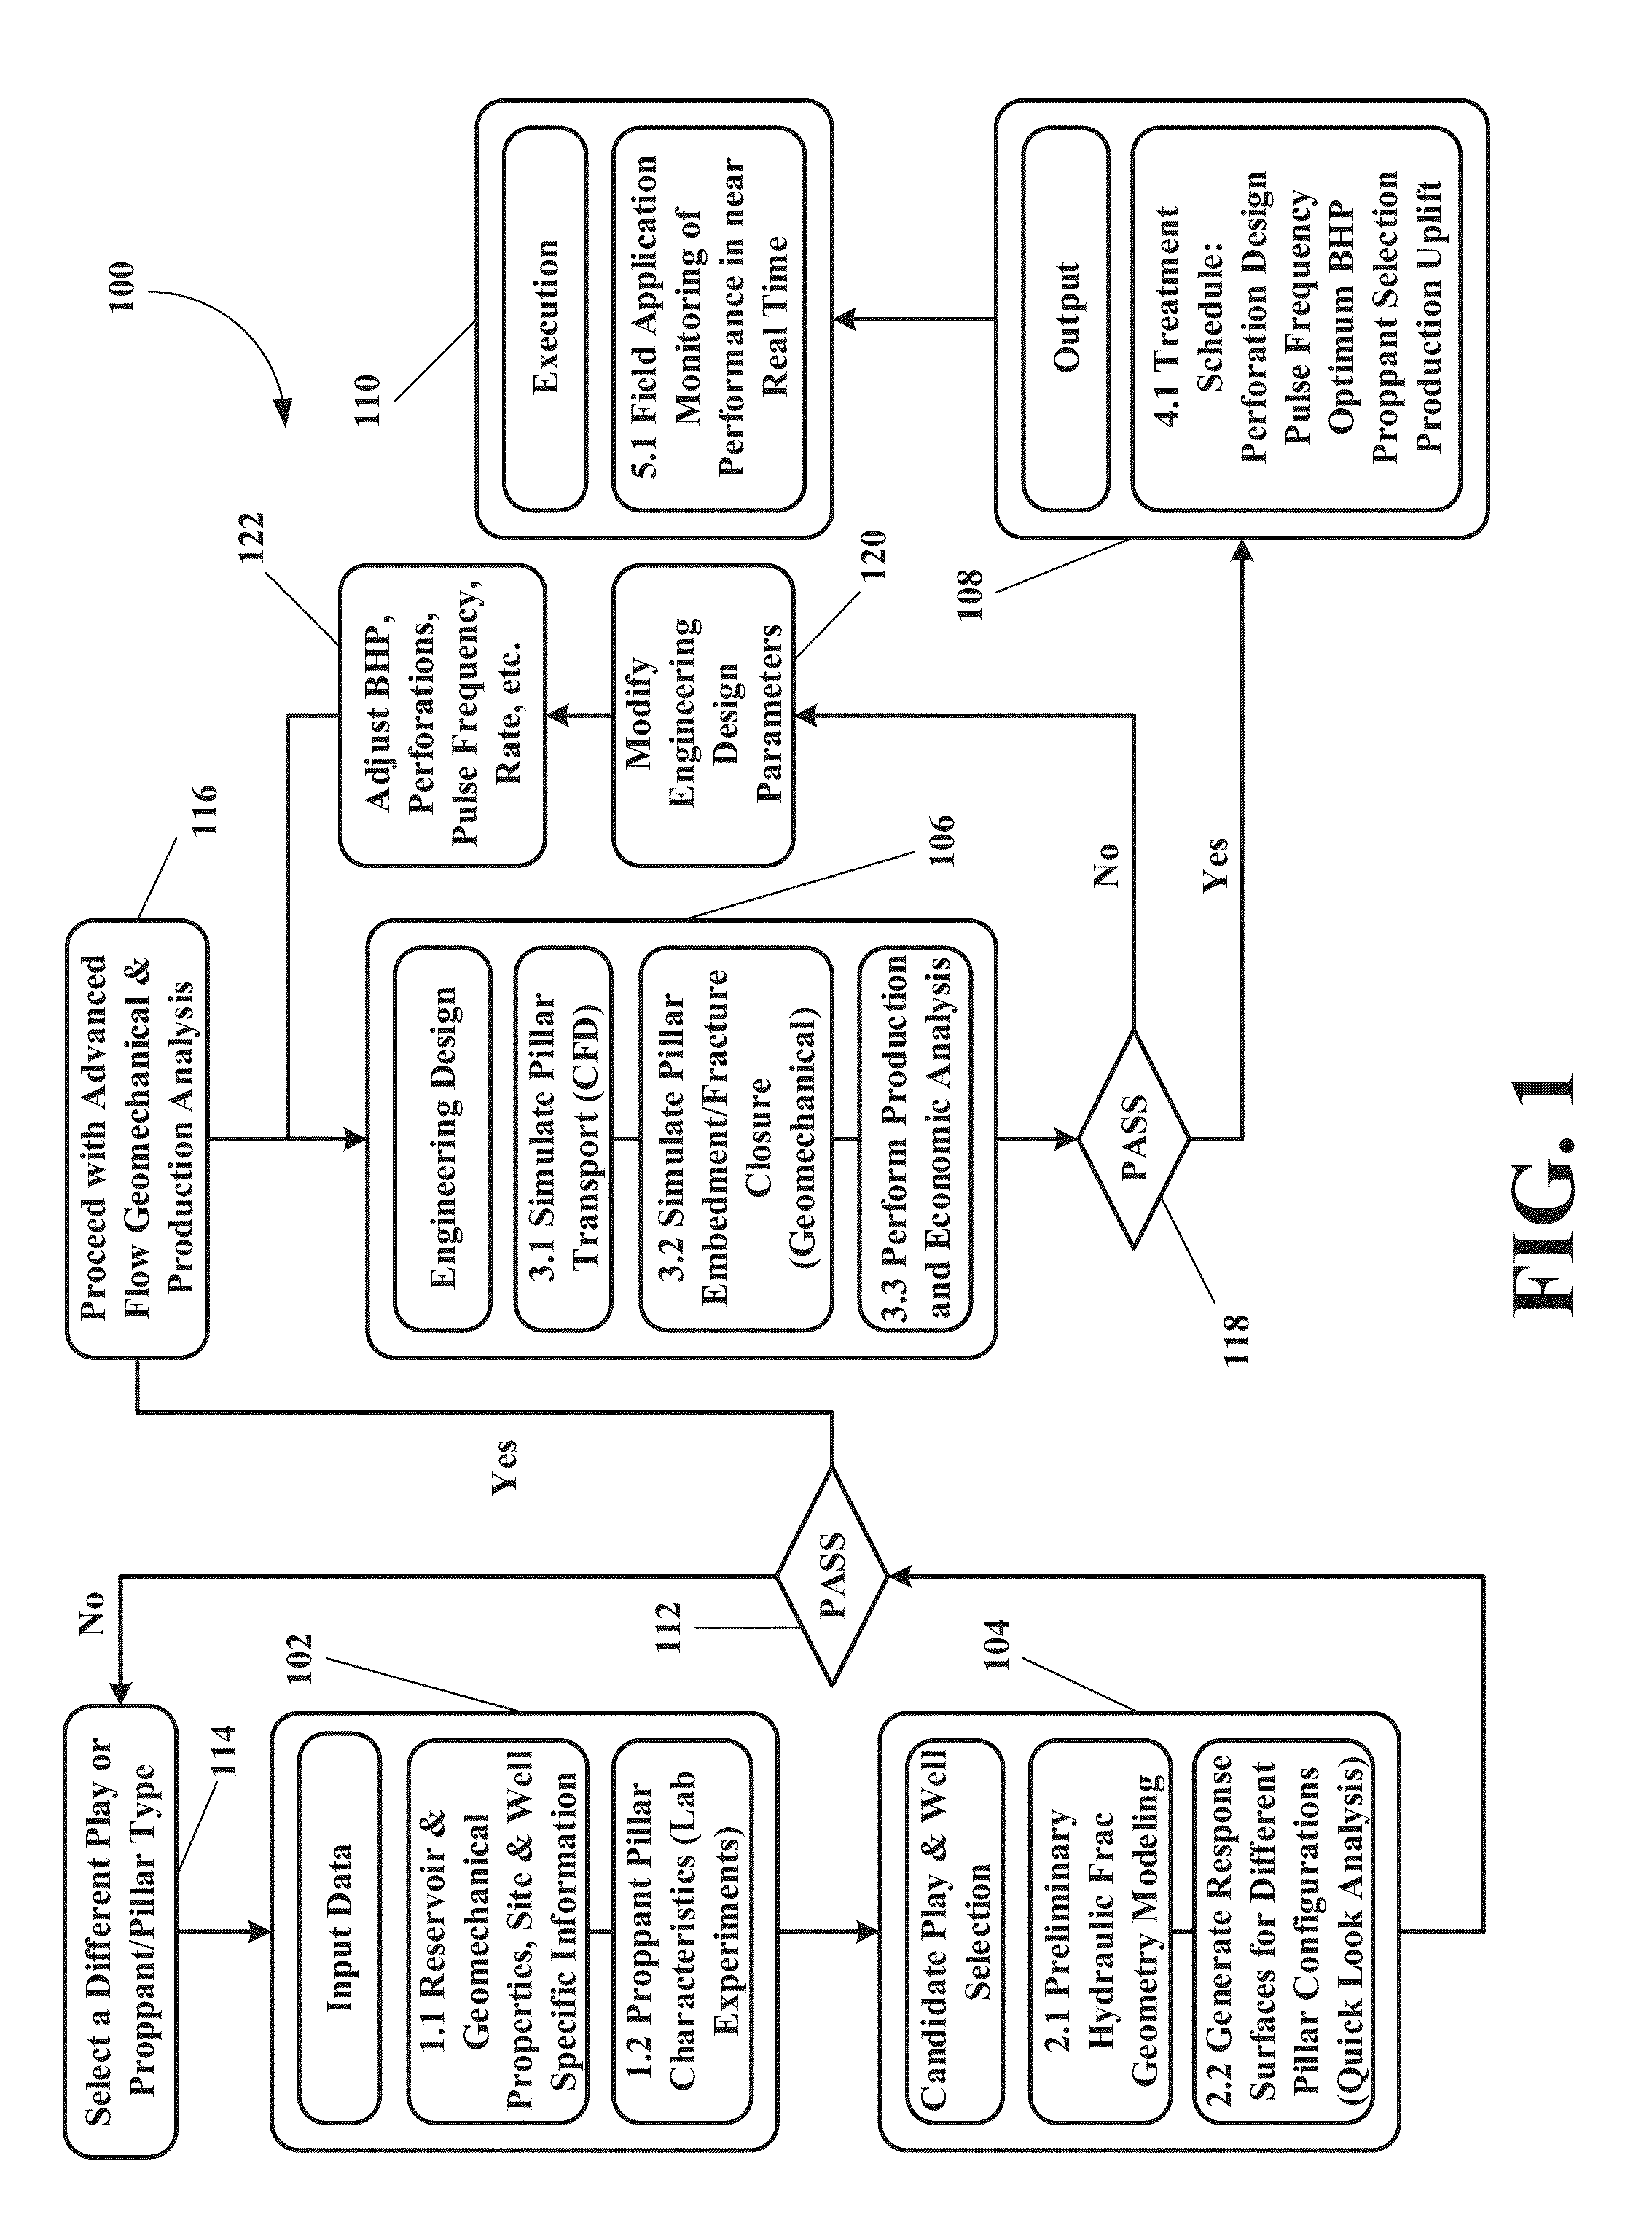 Systems and methods for optimizing formation fracturing operations